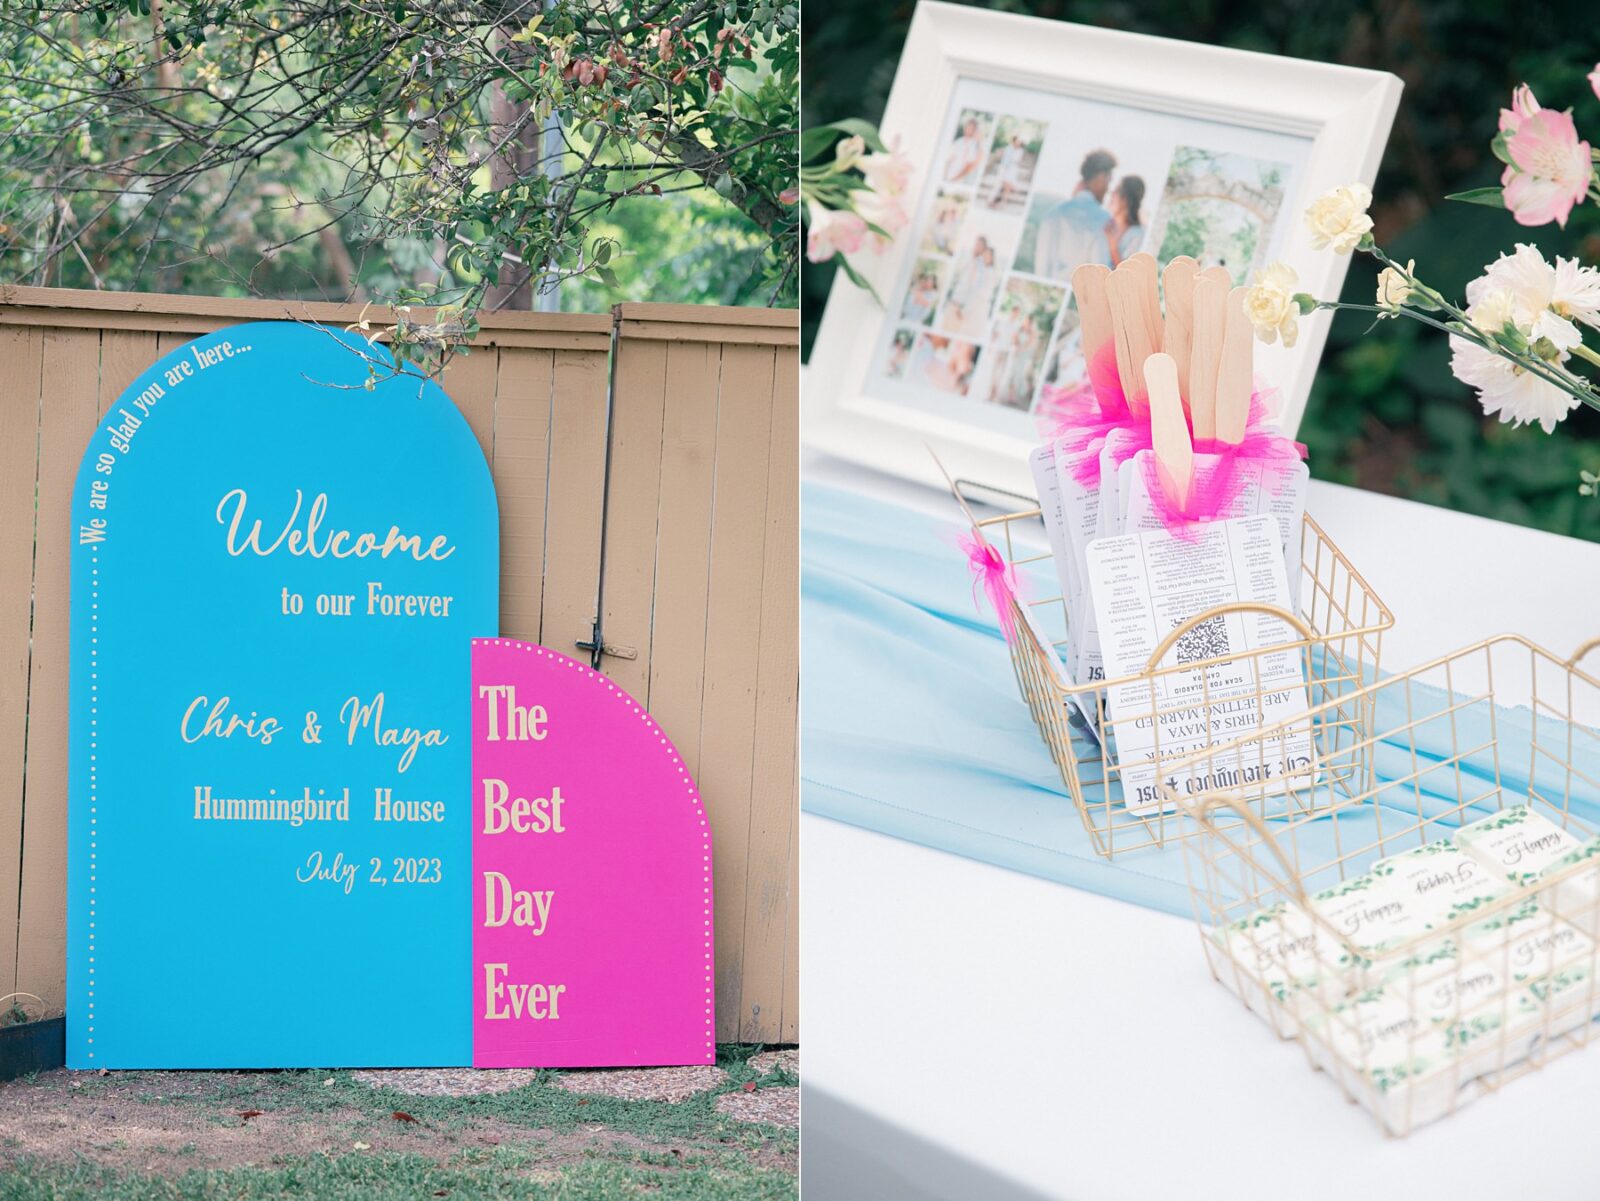 magenta and teal wedding welcome sign, Austin Wedding at Hummingbird House, with wedding photos by Tara Lyons Photography. Other vendors: Mistique Makeup, Cana Events, Twin Flame Events, Simply Chic Event Rentals, Live Oak Photo Booth